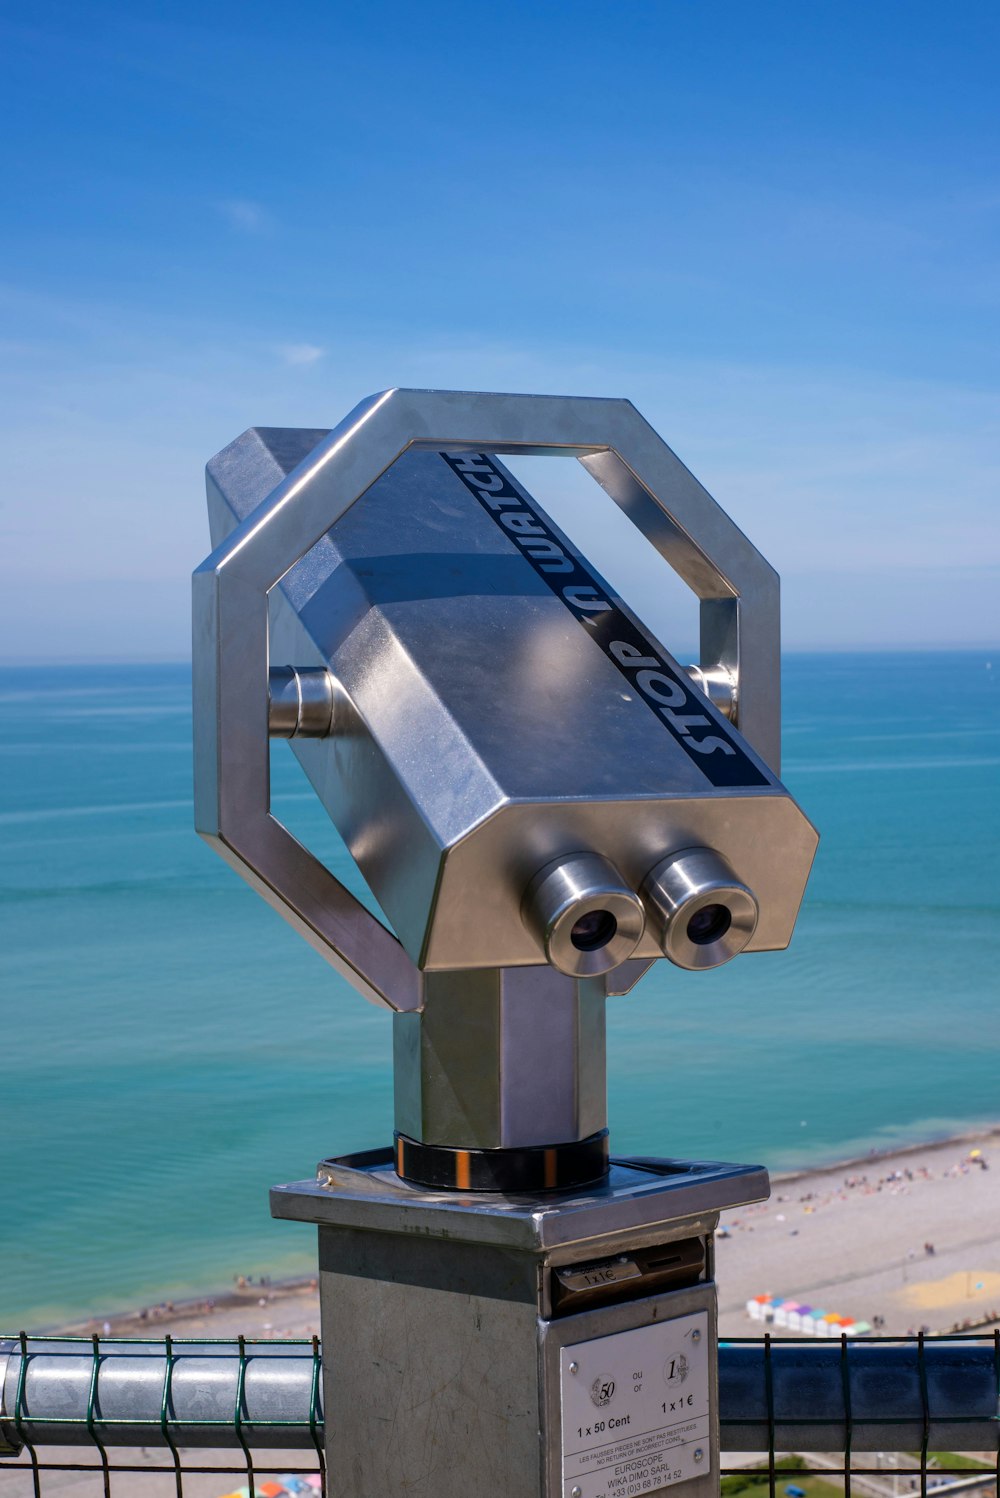 gray and black telescope on blue sea under blue sky during daytime